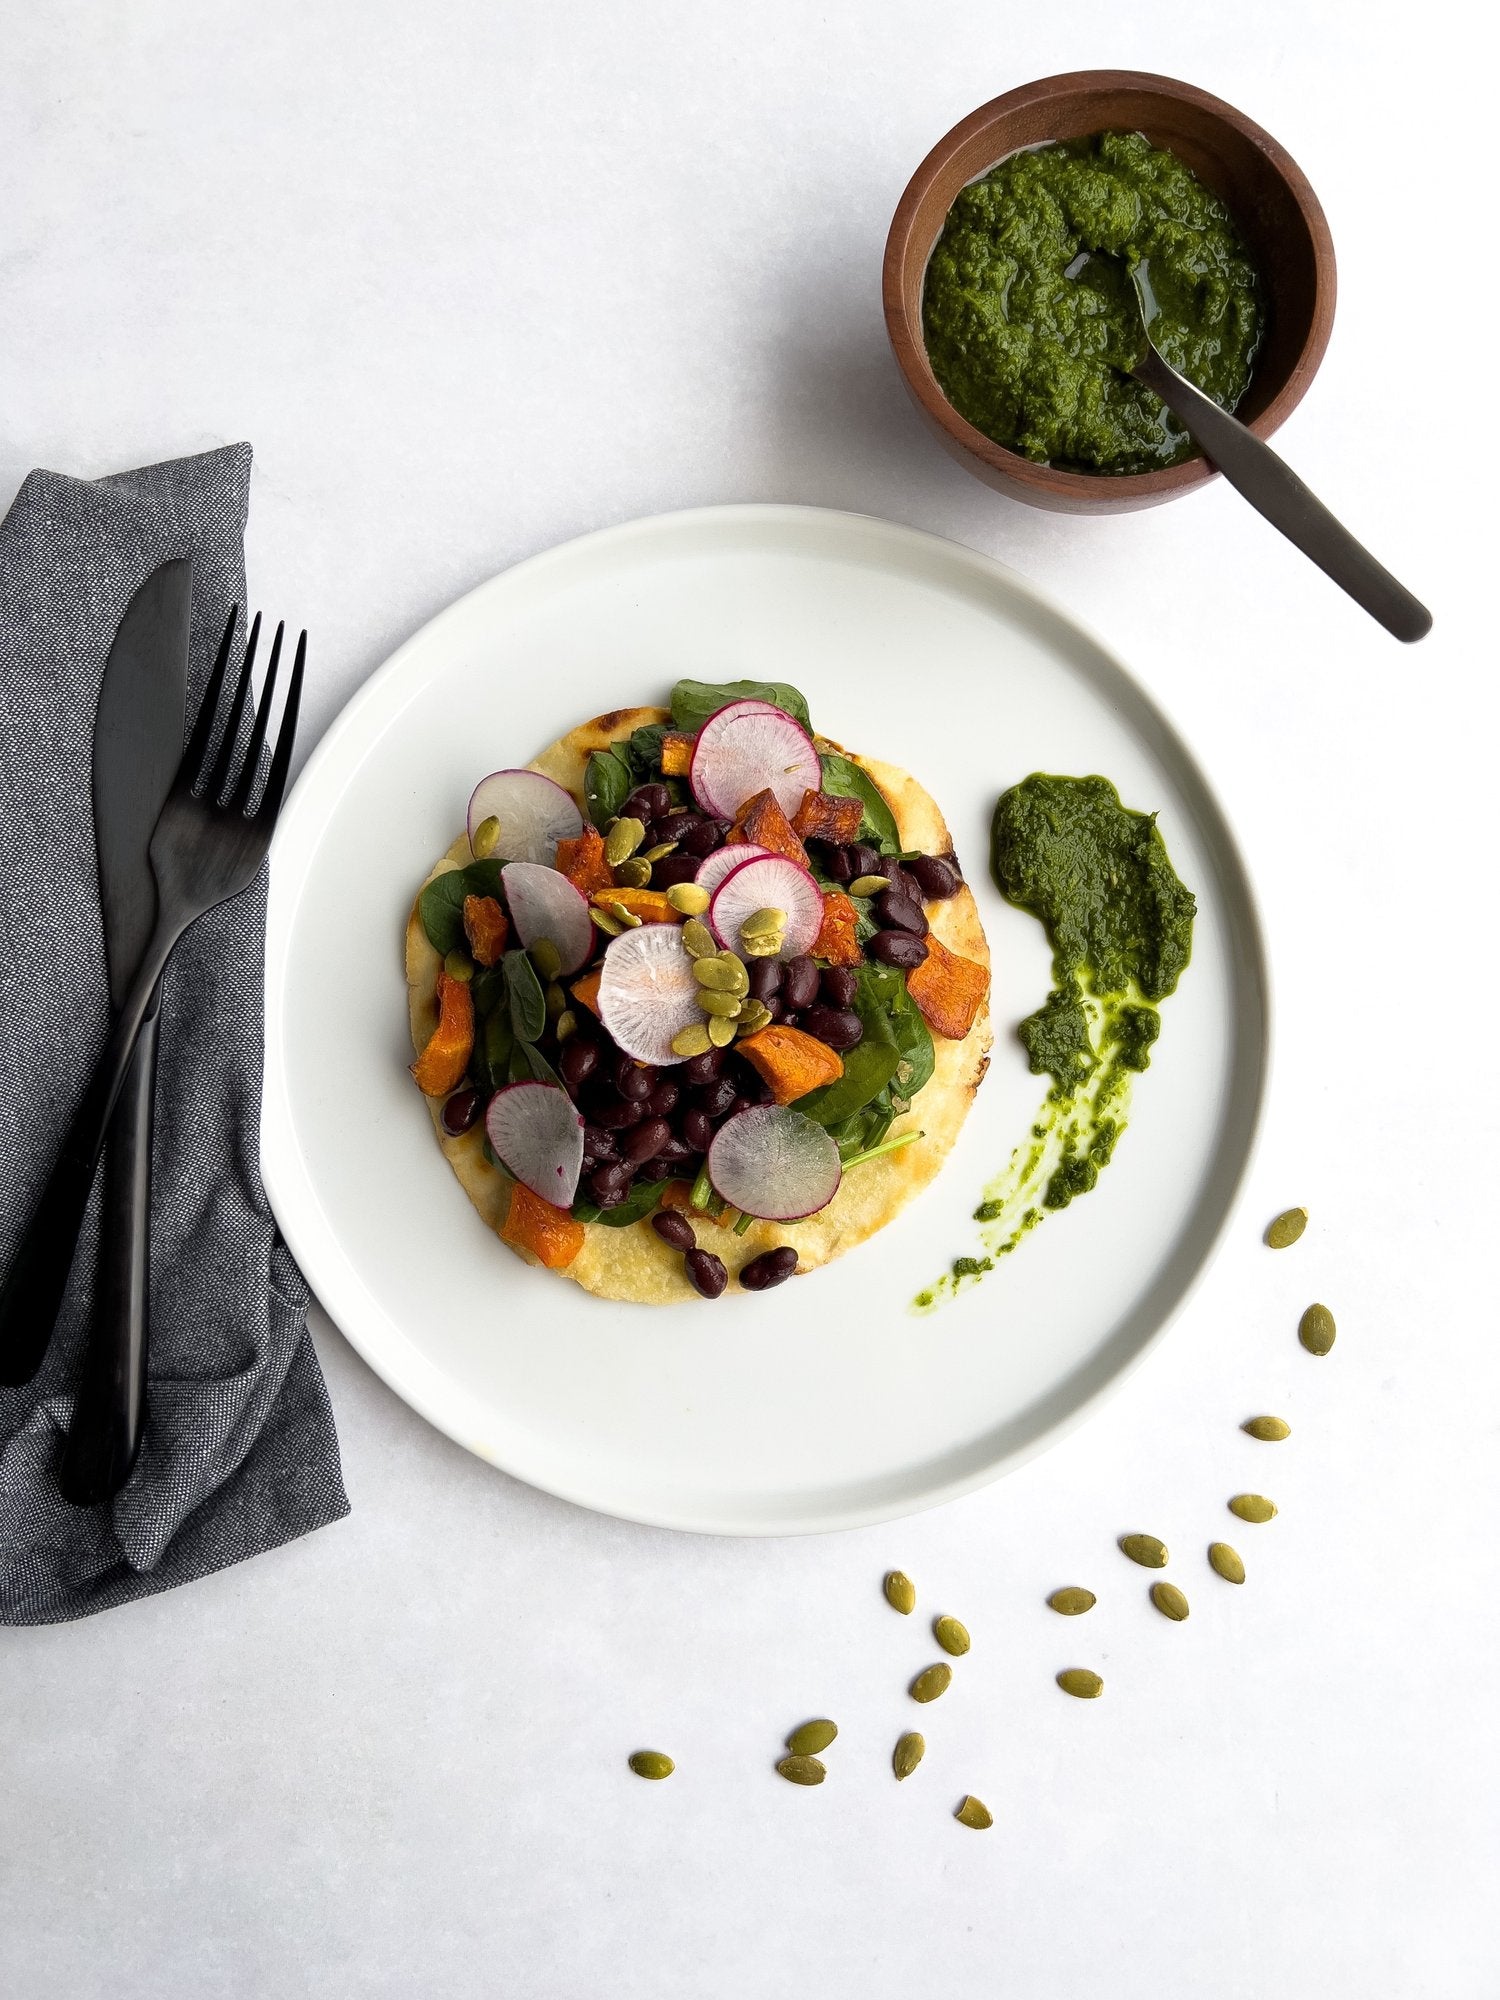 Tostadas with Roasted Butternut Squash, Spinach, and Black Beans